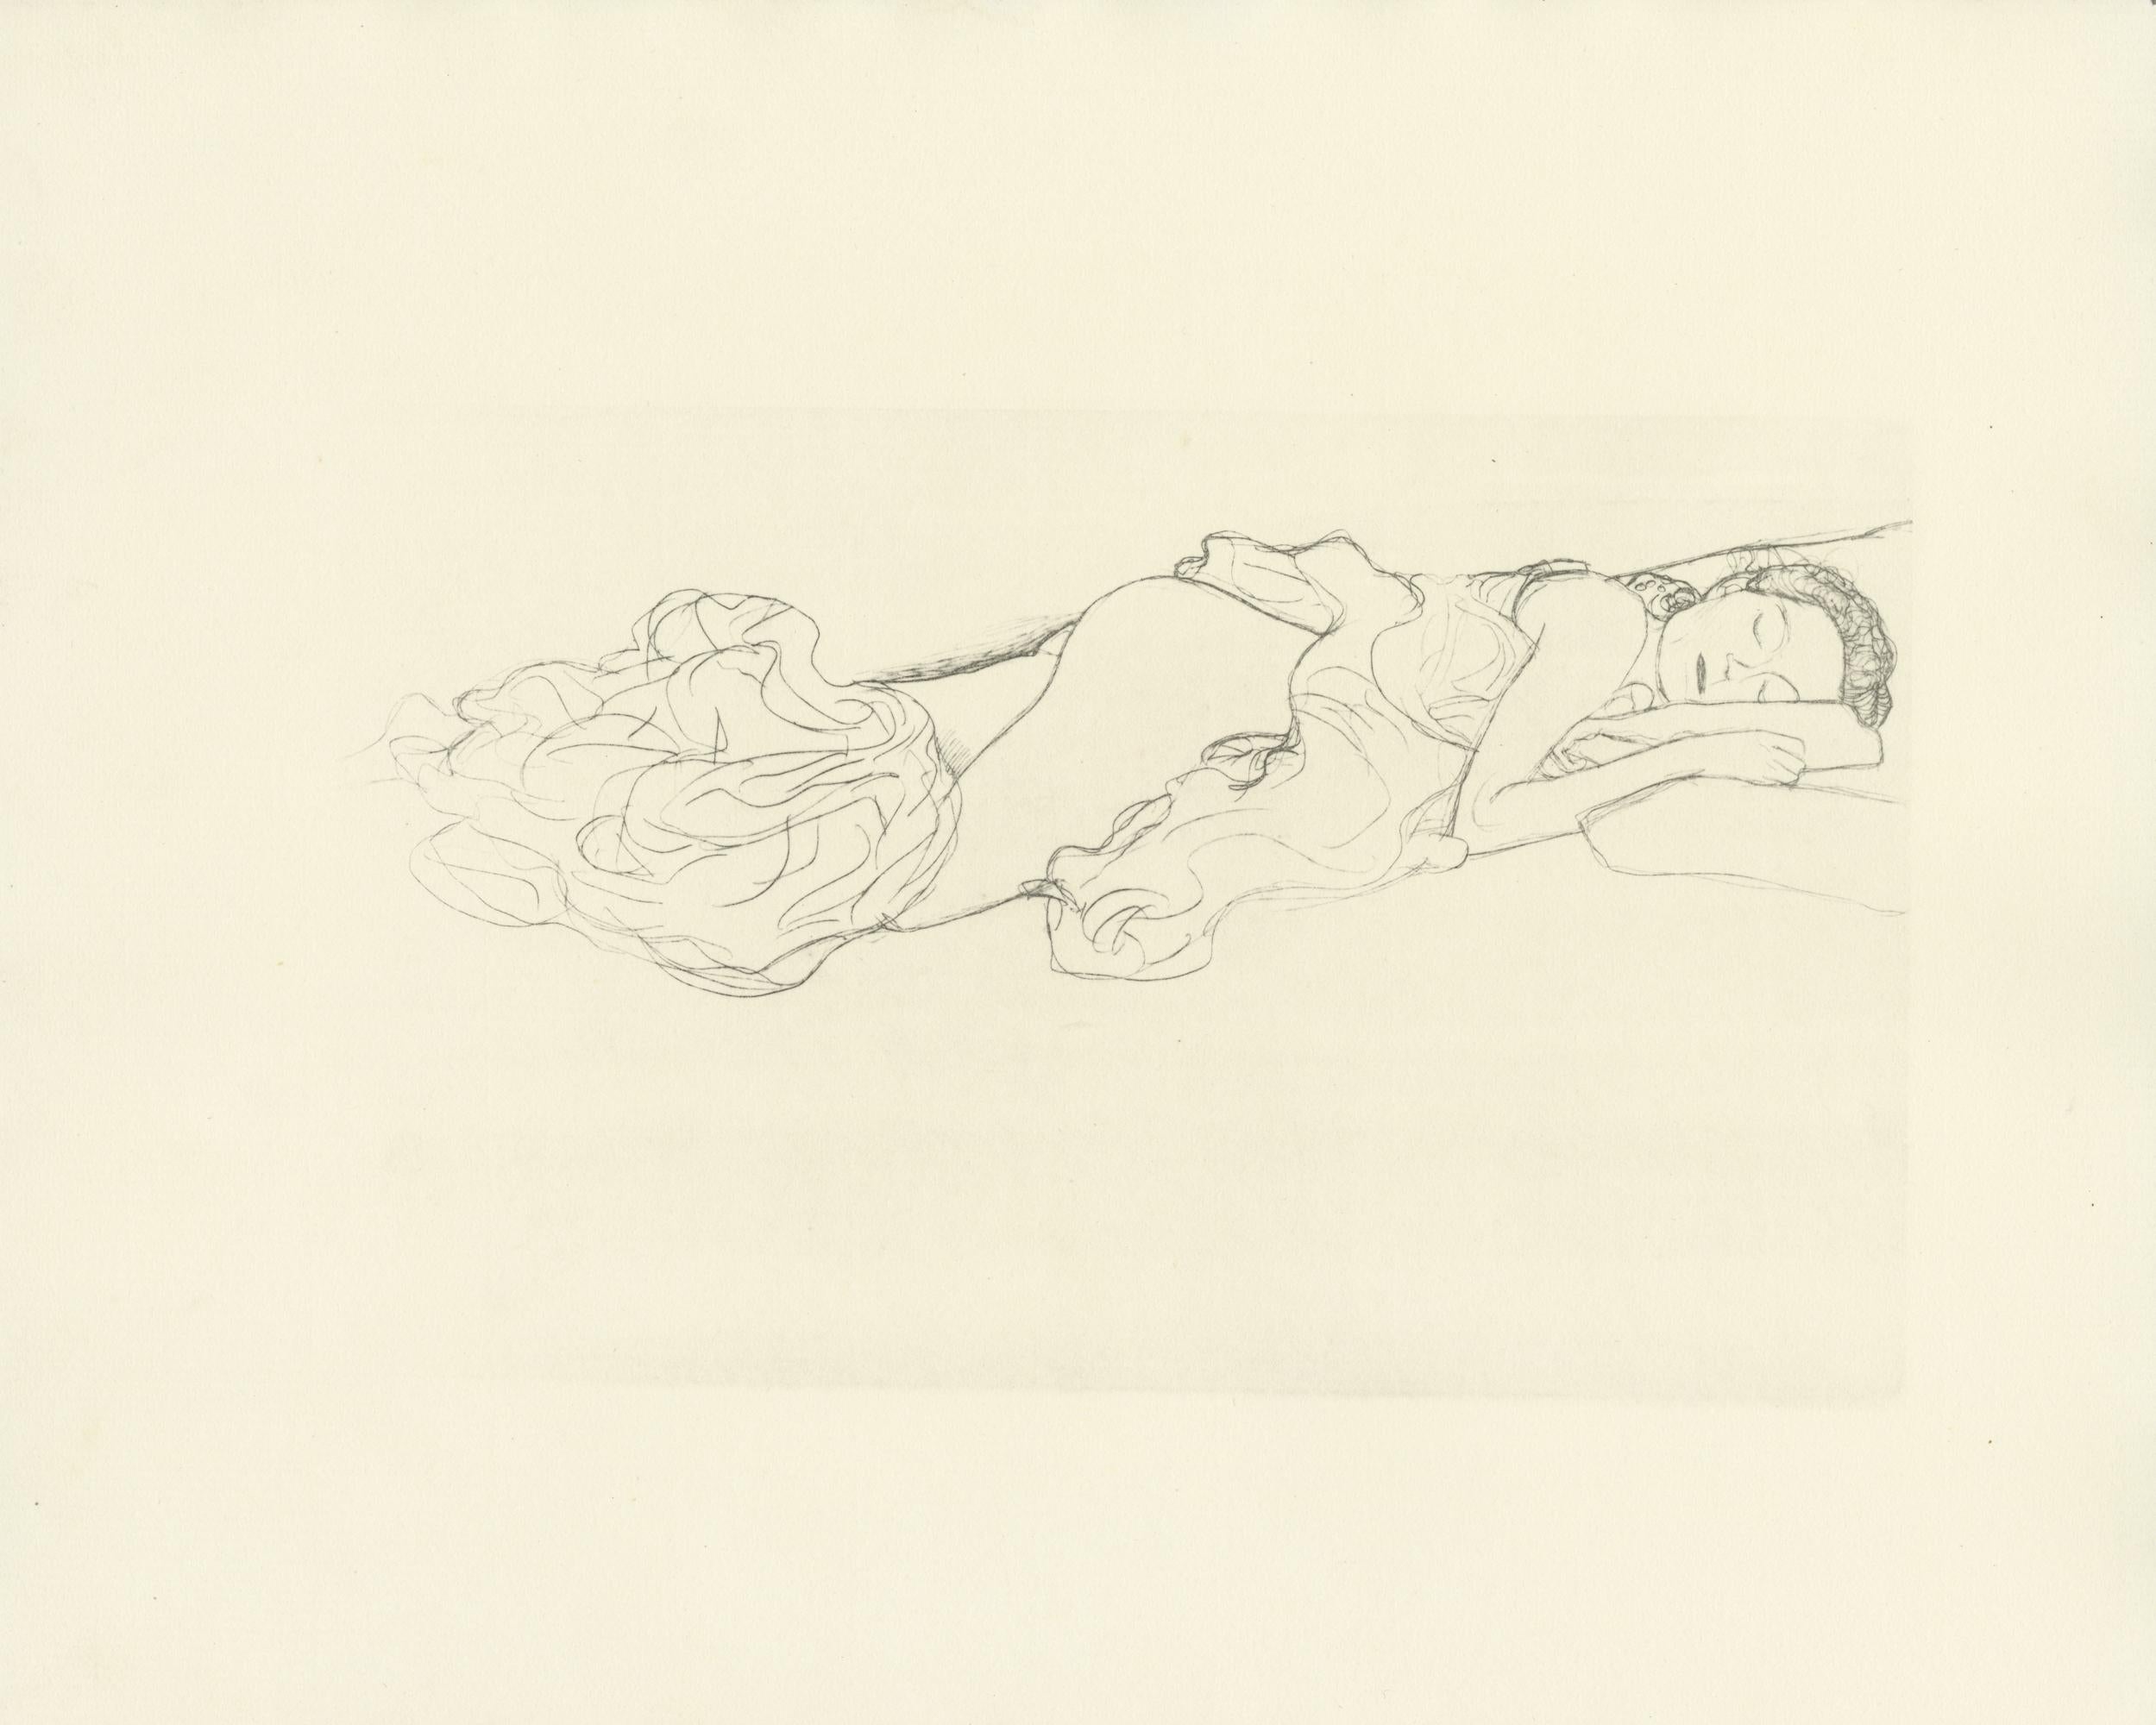 Plate #12 from Gustav Klimt's 1907 "Dialogues of the Courtesans" portfolio, consisting of 15 collotypes on cream japon paper. The drawings in this folio are said to be studies for Klimt's well-known Water Serpents paintings. 

This print is from